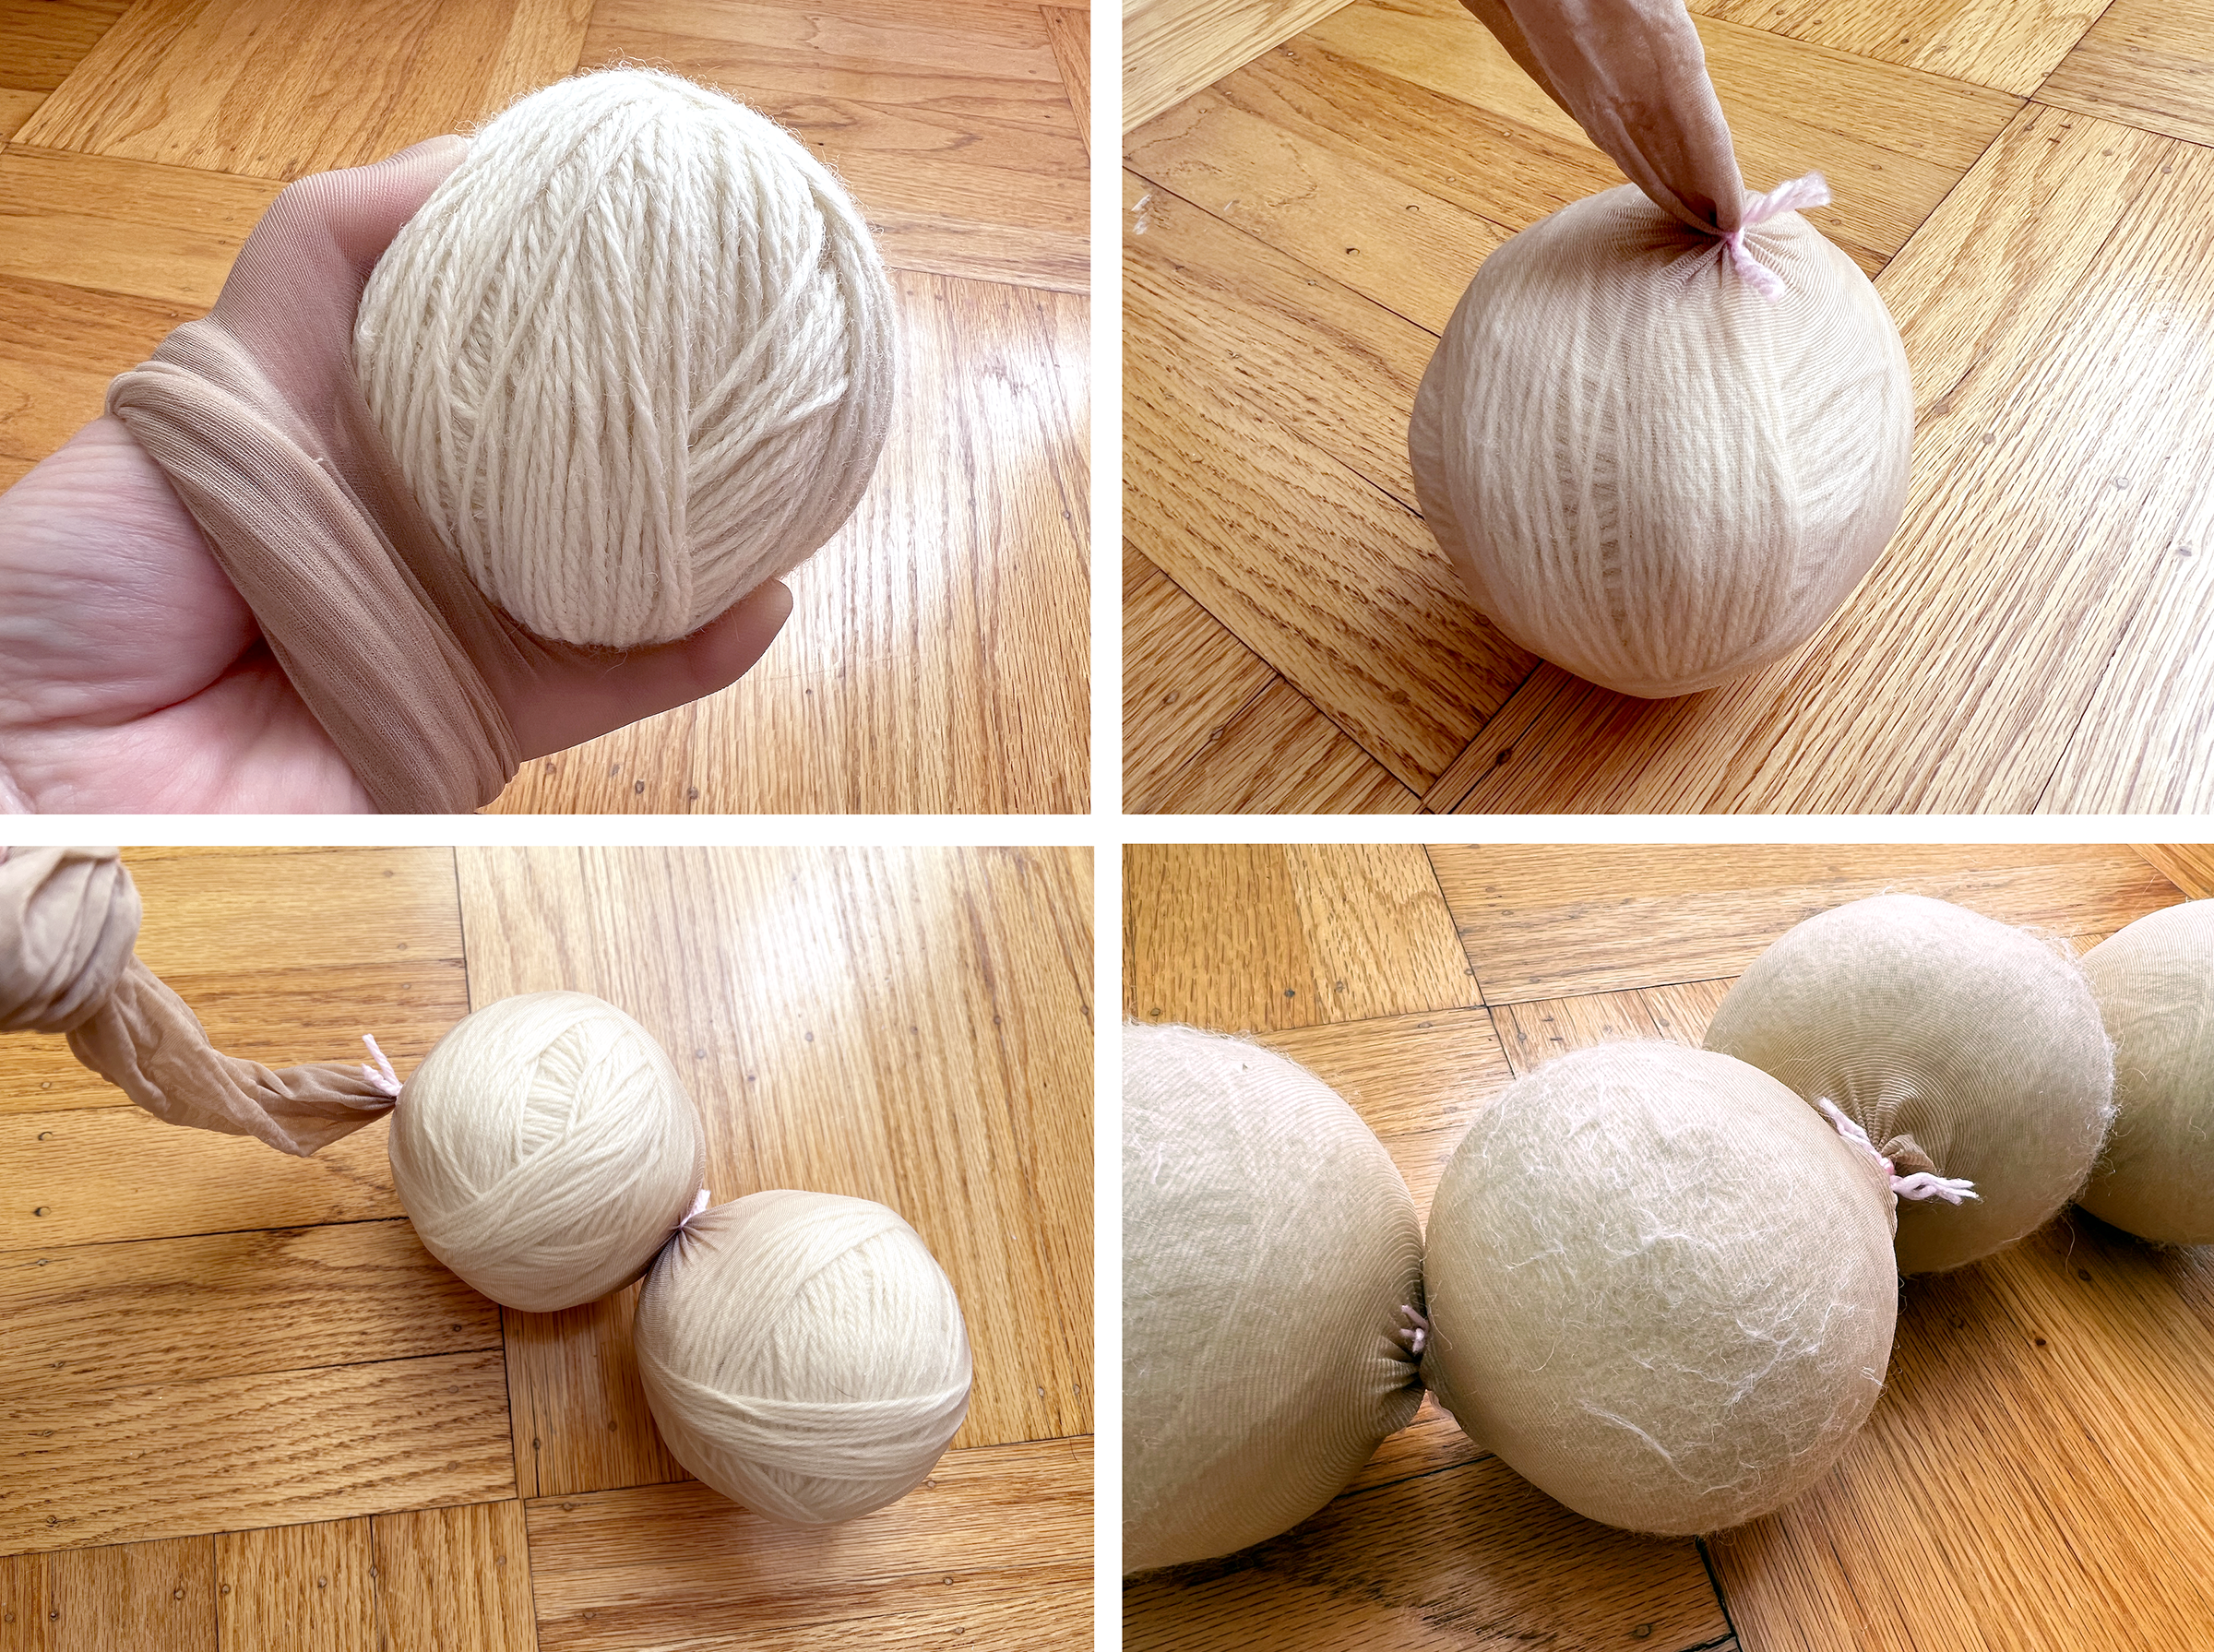 photo collage of 4 images demonstrating how to assemble wool yarn balls into a pair of pantyhose to prepare for the felting process of making dryer balls